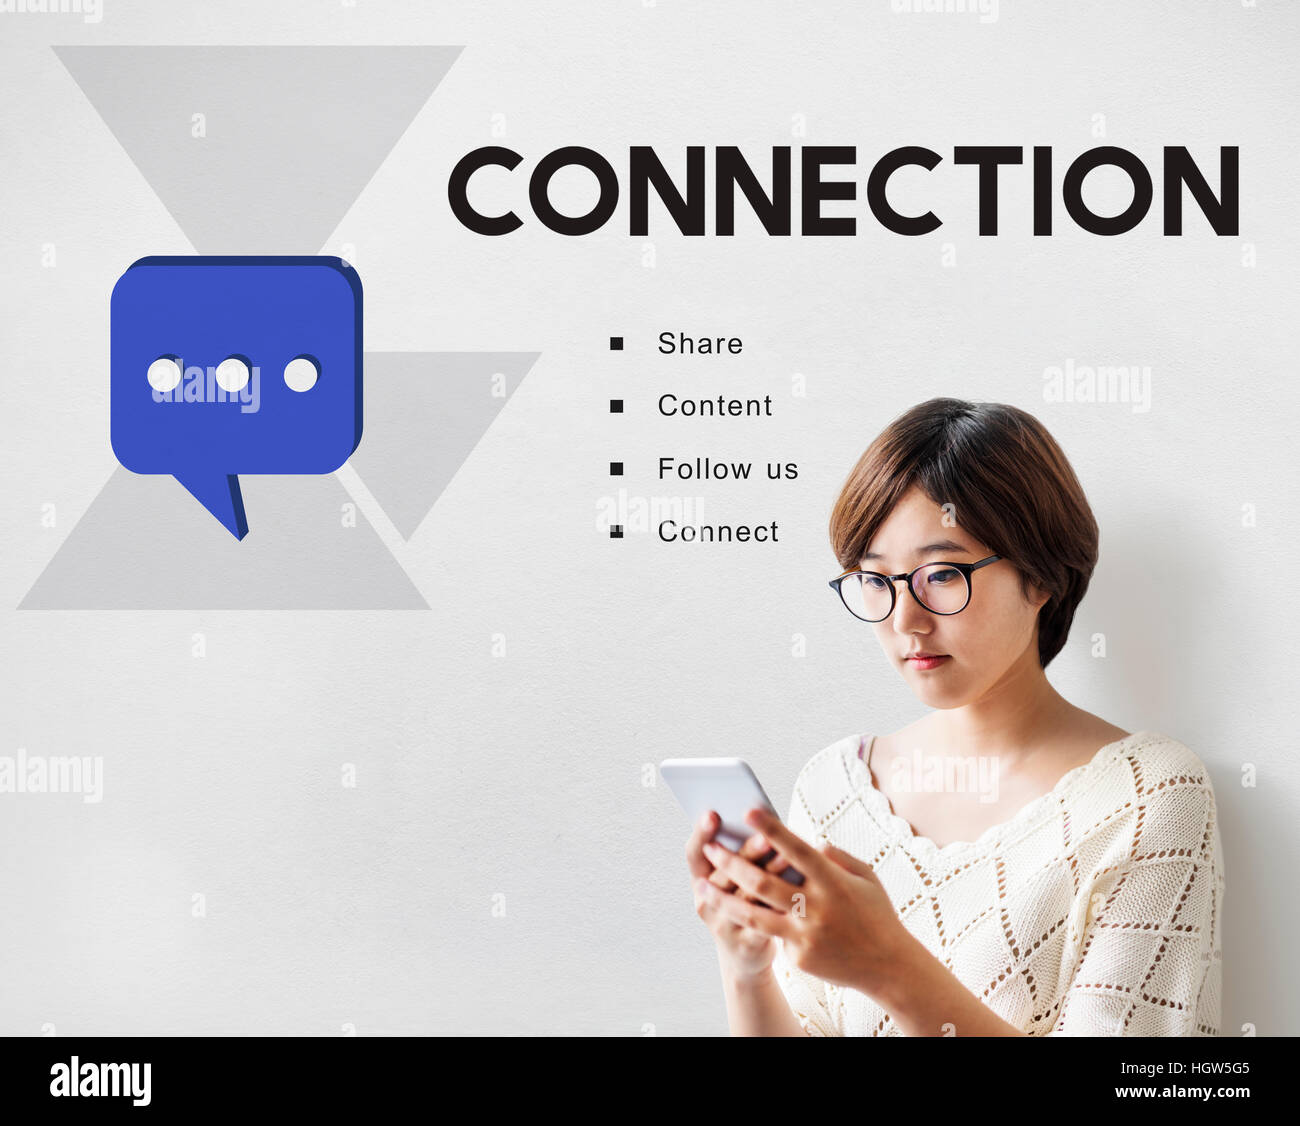 Social Network Communication Connection Concept Stock Photo